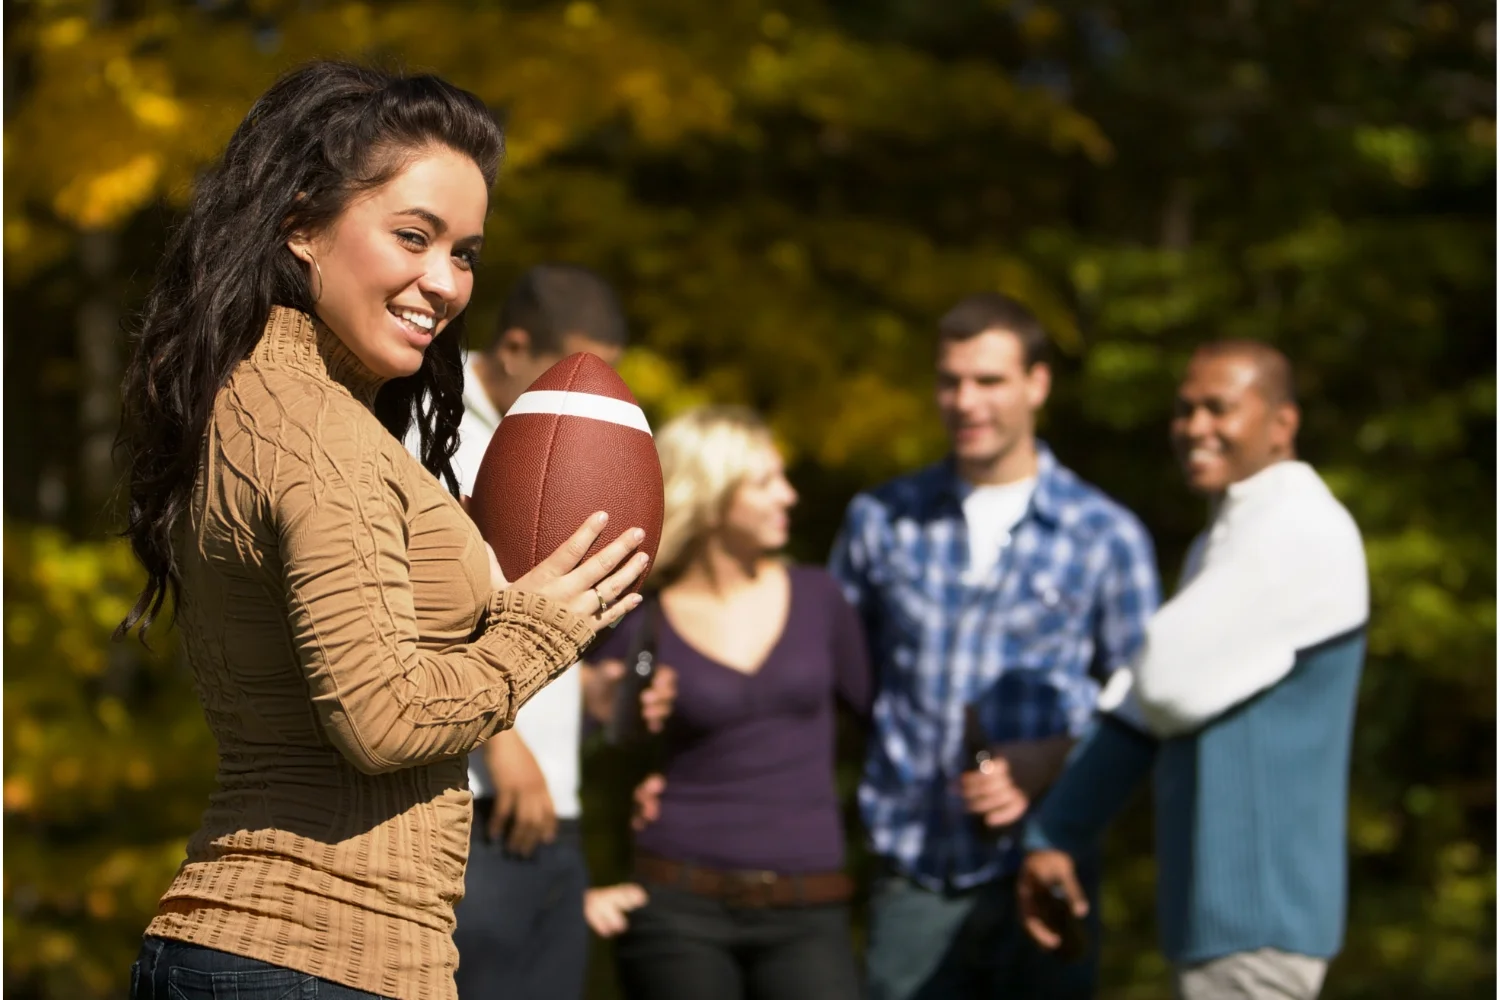 Woman Holding Football with Tailgate in Background